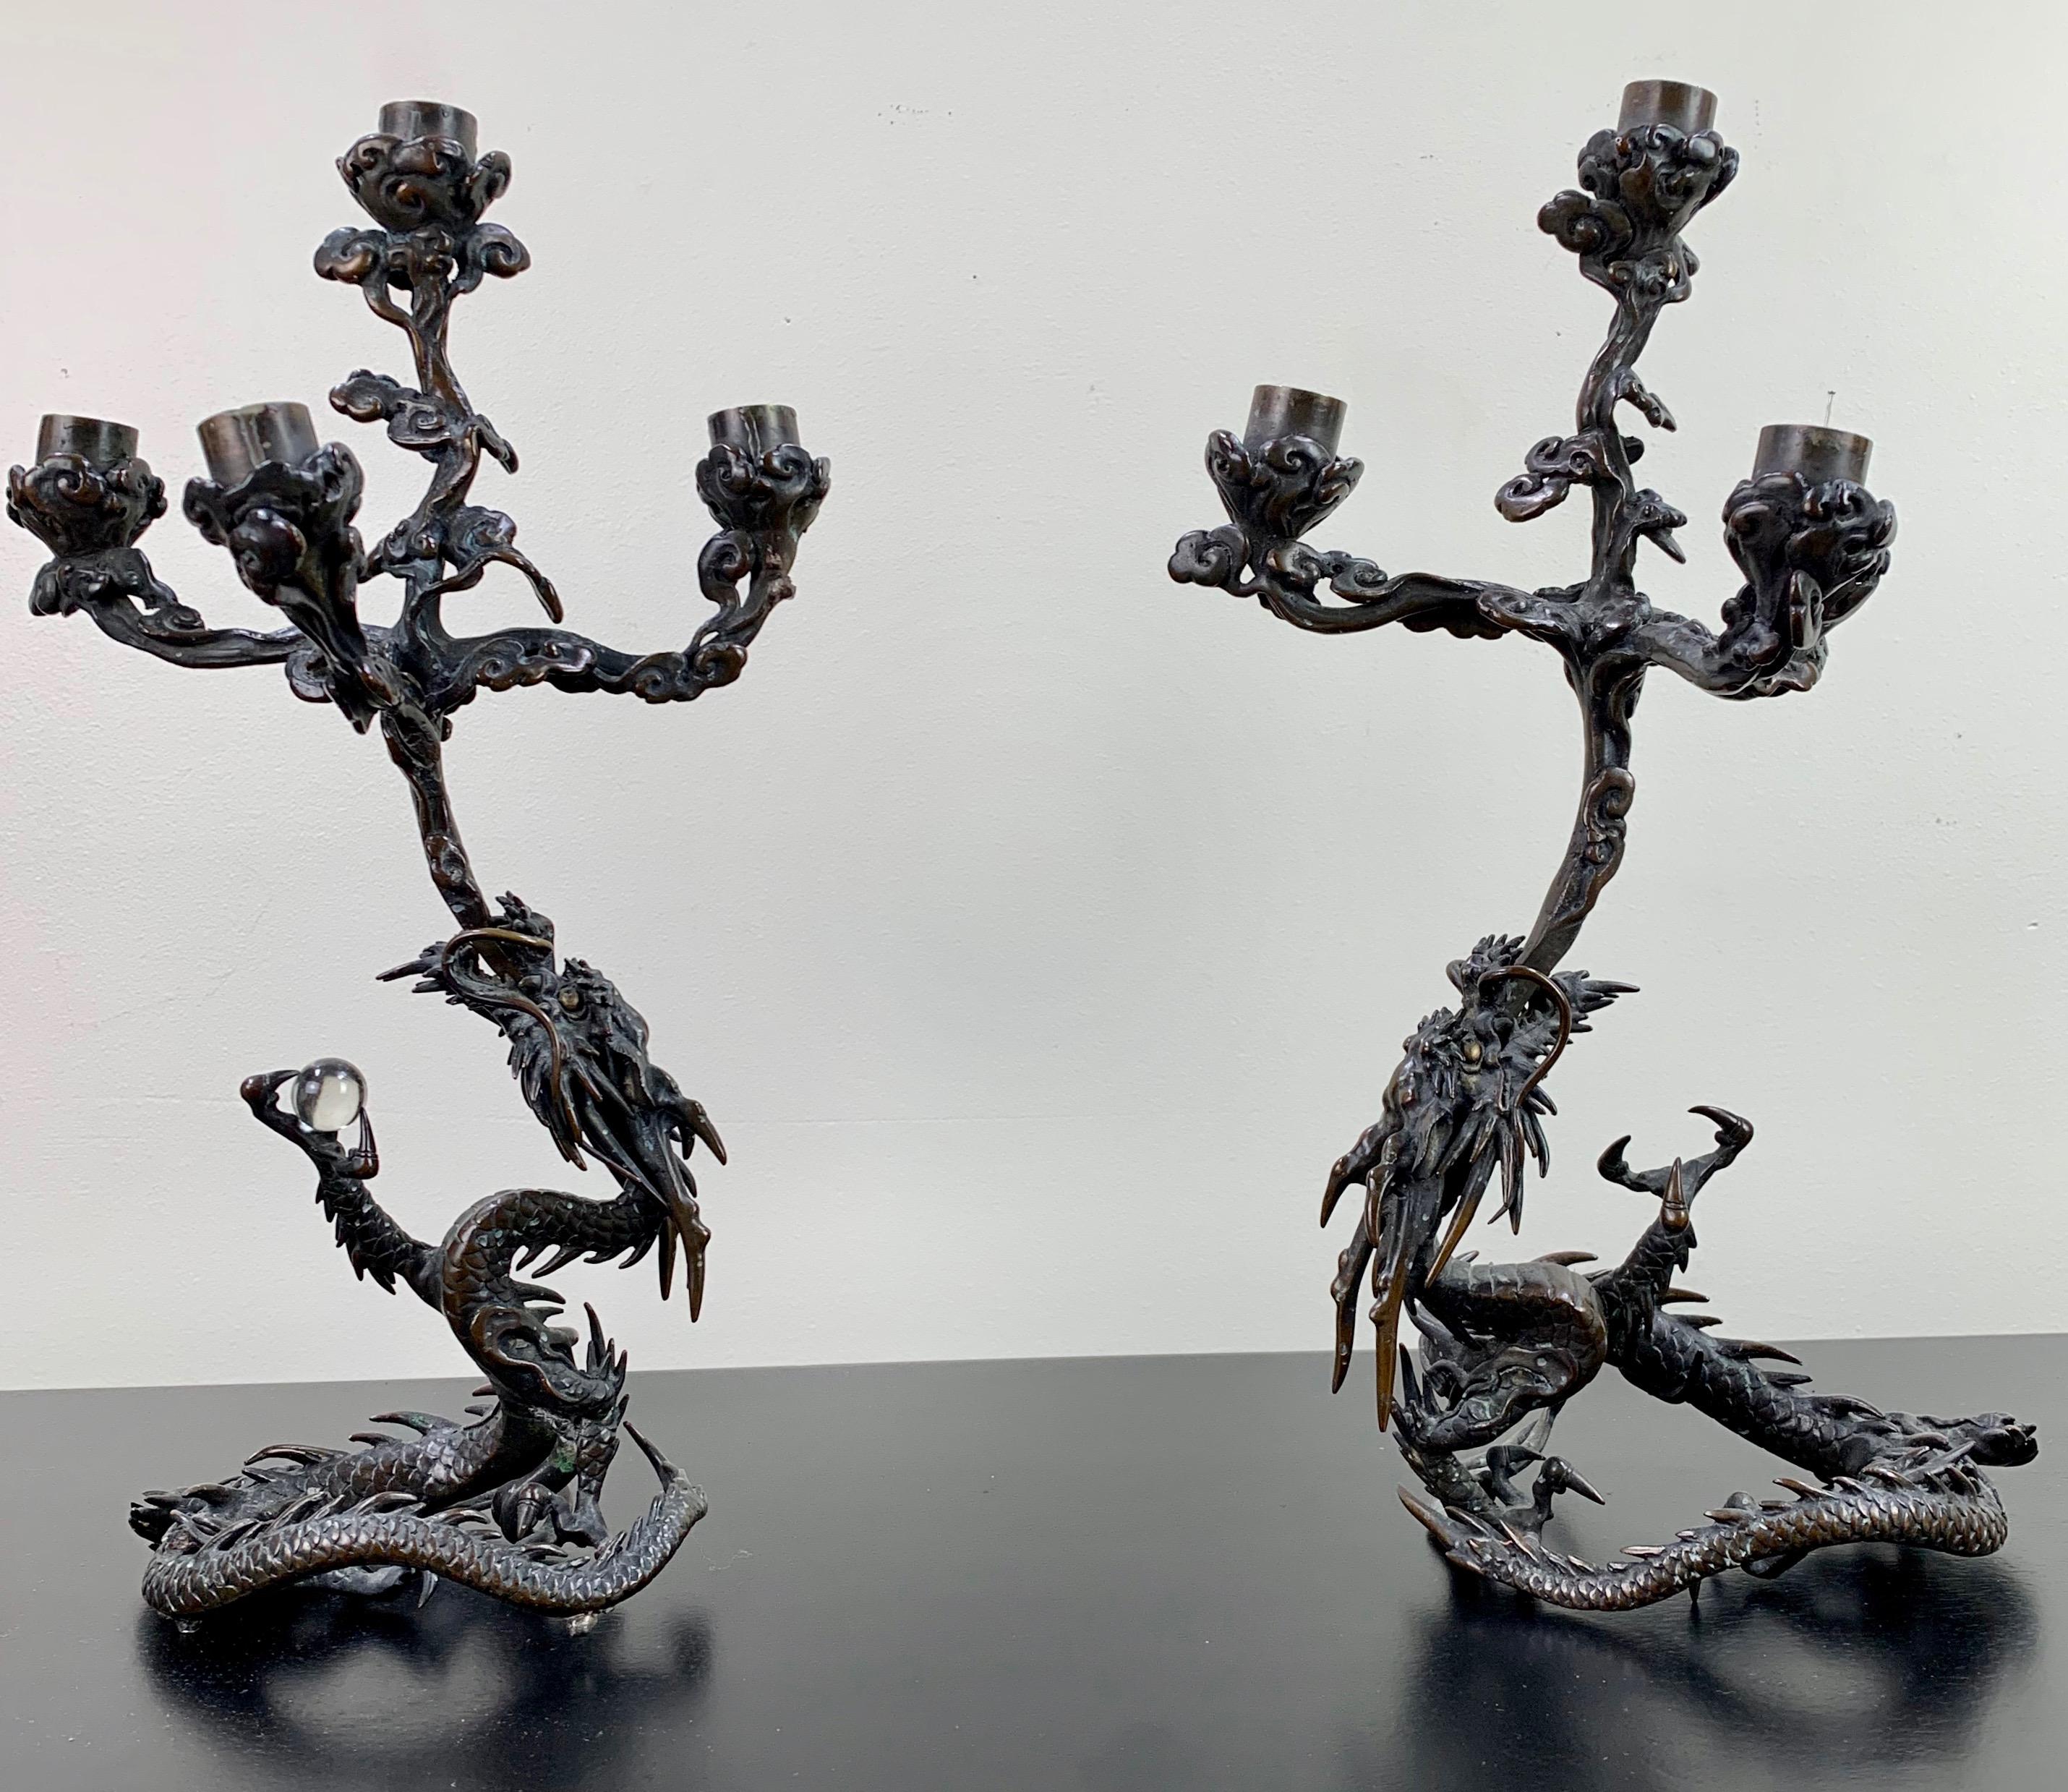 In two separate pieces, these bronze whimsical dragons hold a four arm candleholder in their mouths and a crystal ball in their claws.